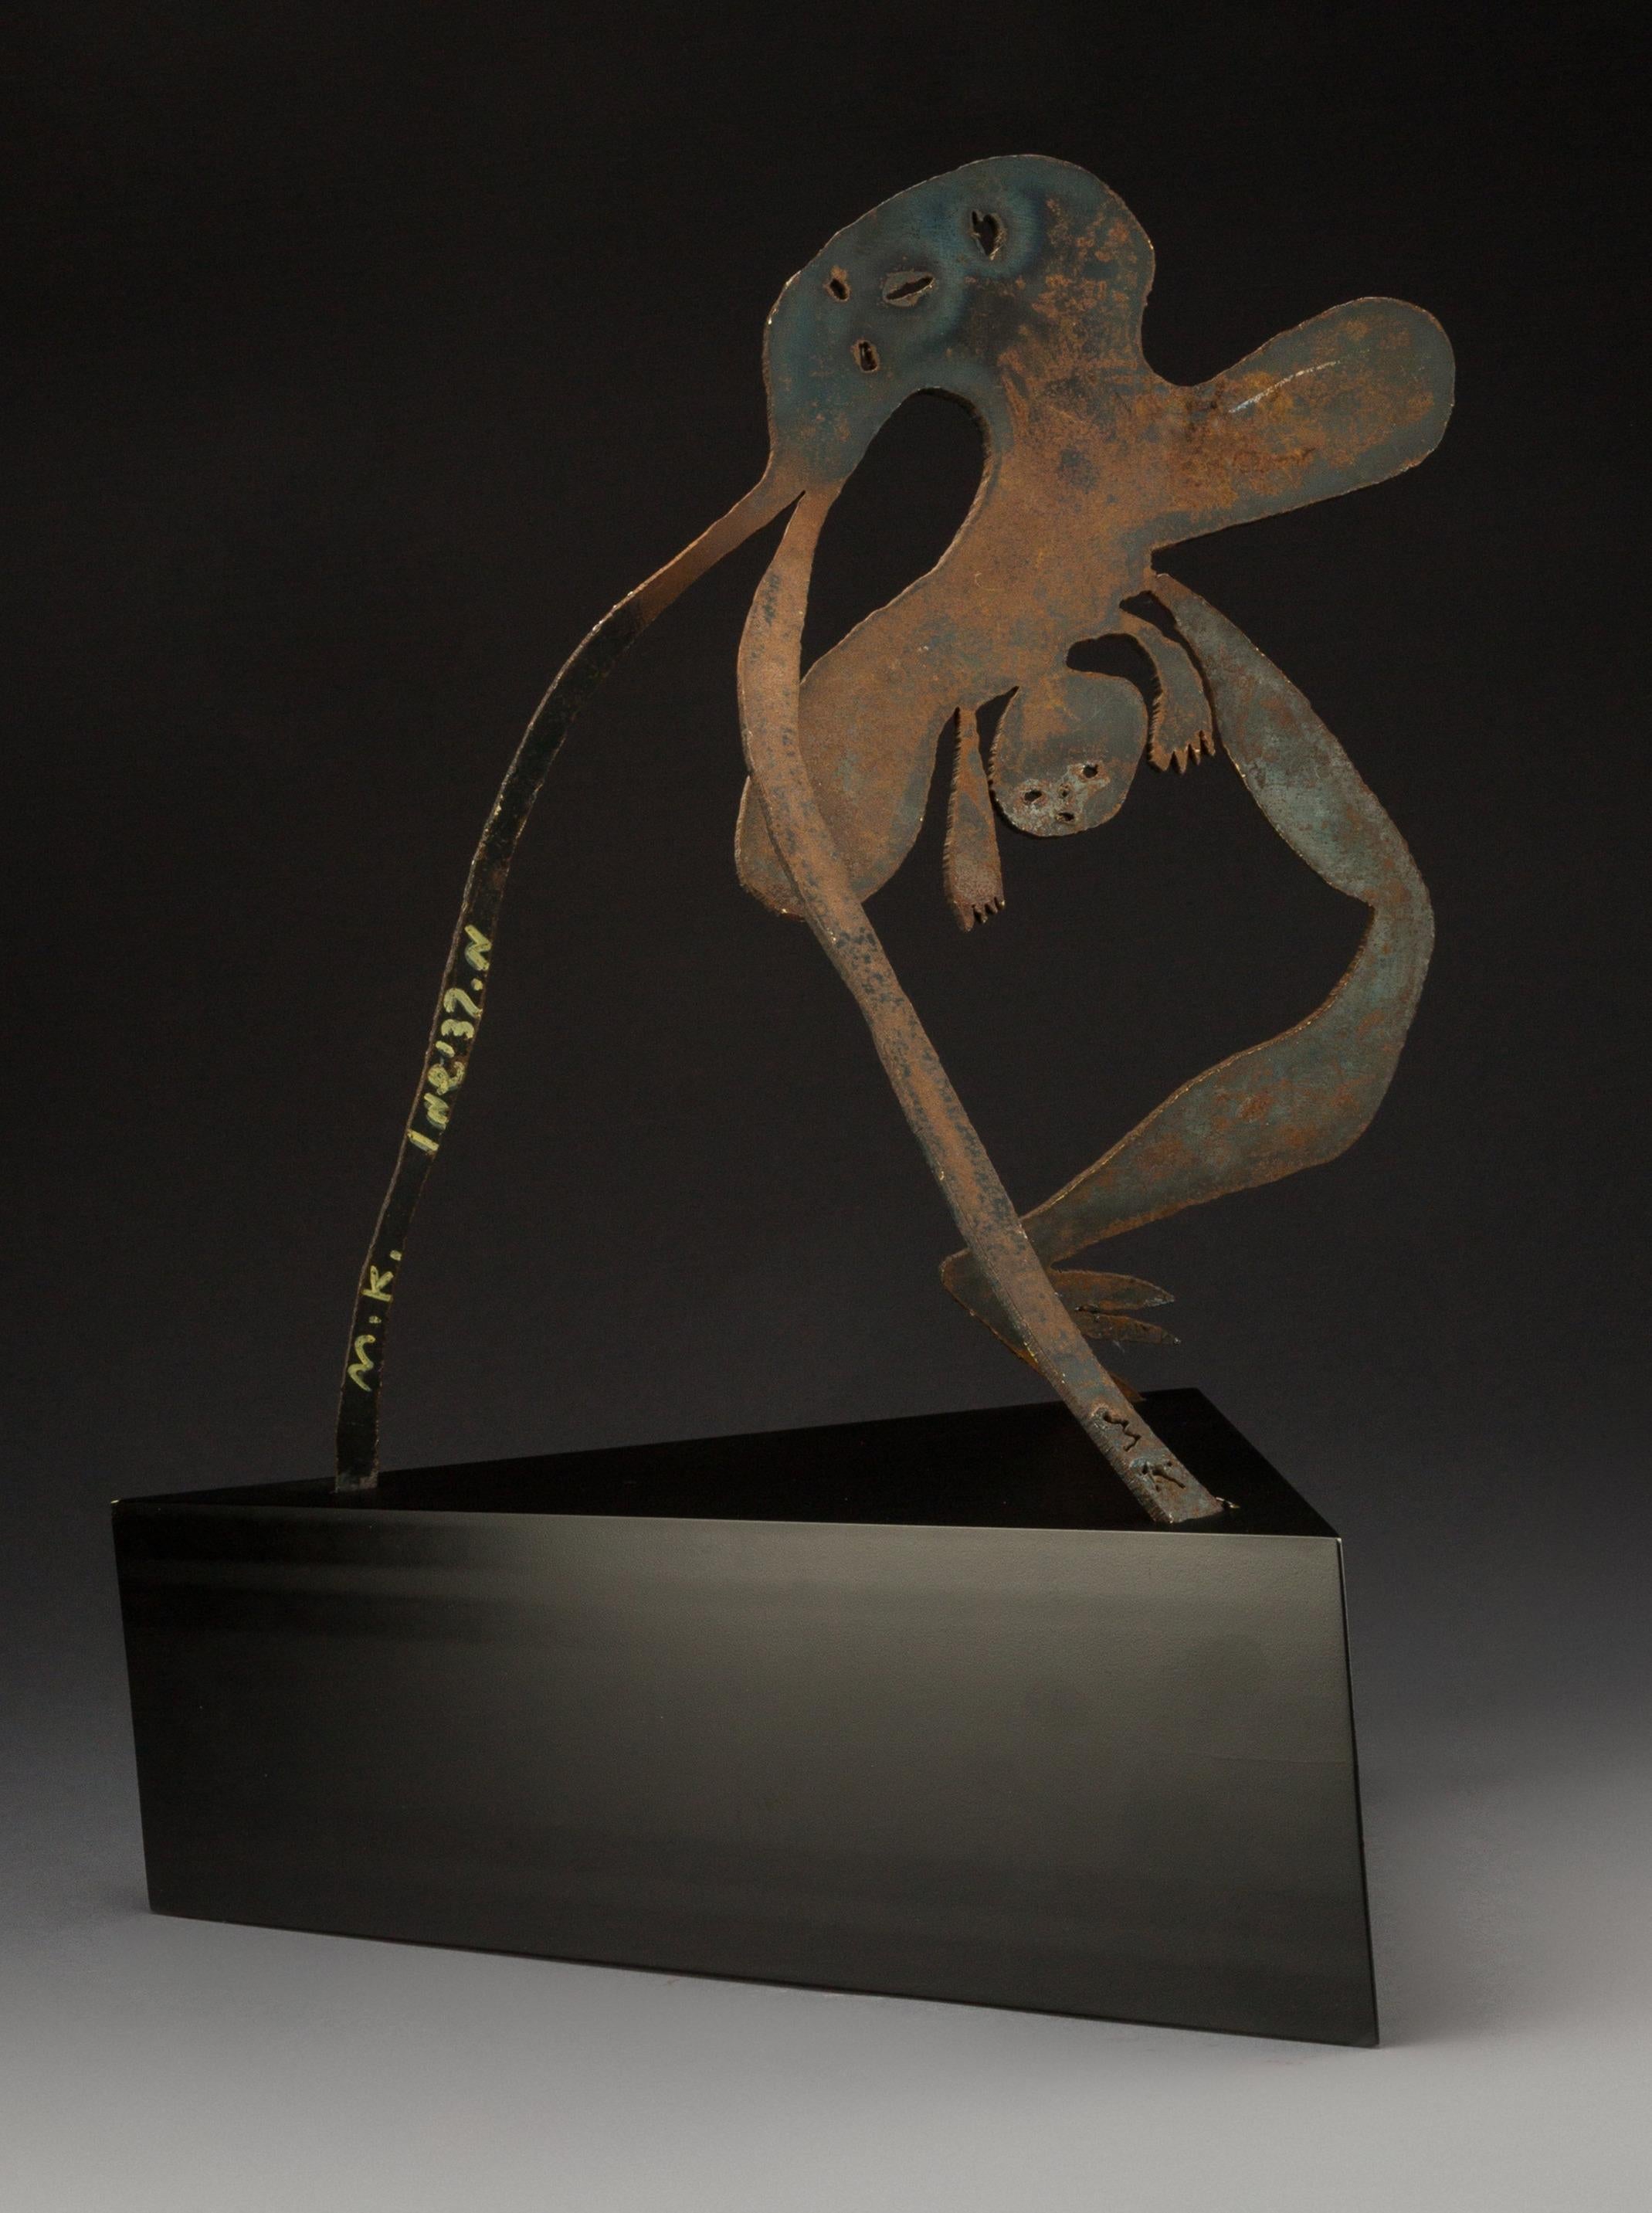 Menashe Kadishman (Israeli, 1932-2015)
Birth
Iron
17-1/2 inches (44.5 cm) high on a 6-1/4 inches (15.9 cm) high wood base
Hand signed and Inscribed on base
Sculpture with base measures 23.75 x 21.5 x 15 inches. Sculpture itself measures 17.5 x 14 x